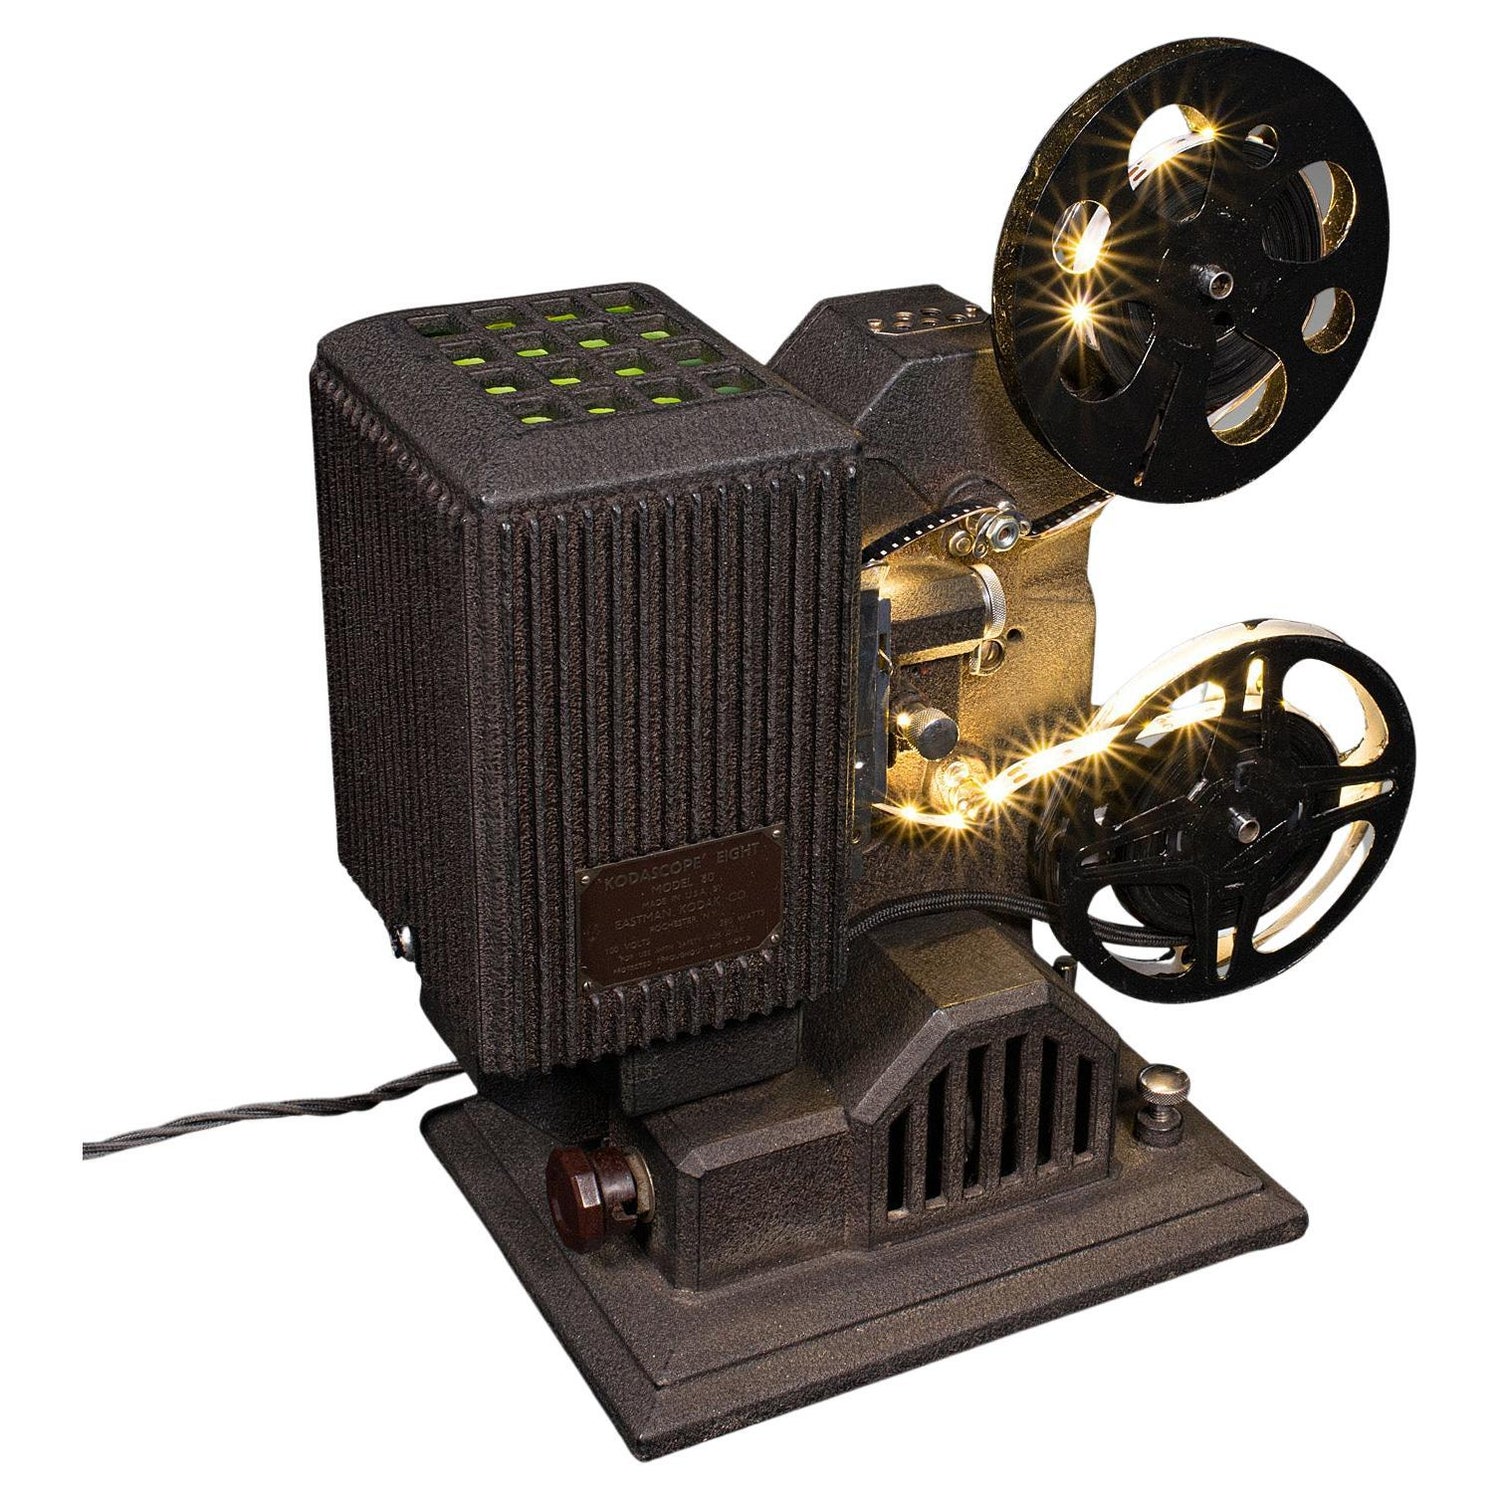 8mm Projector - 3 For Sale on 1stDibs